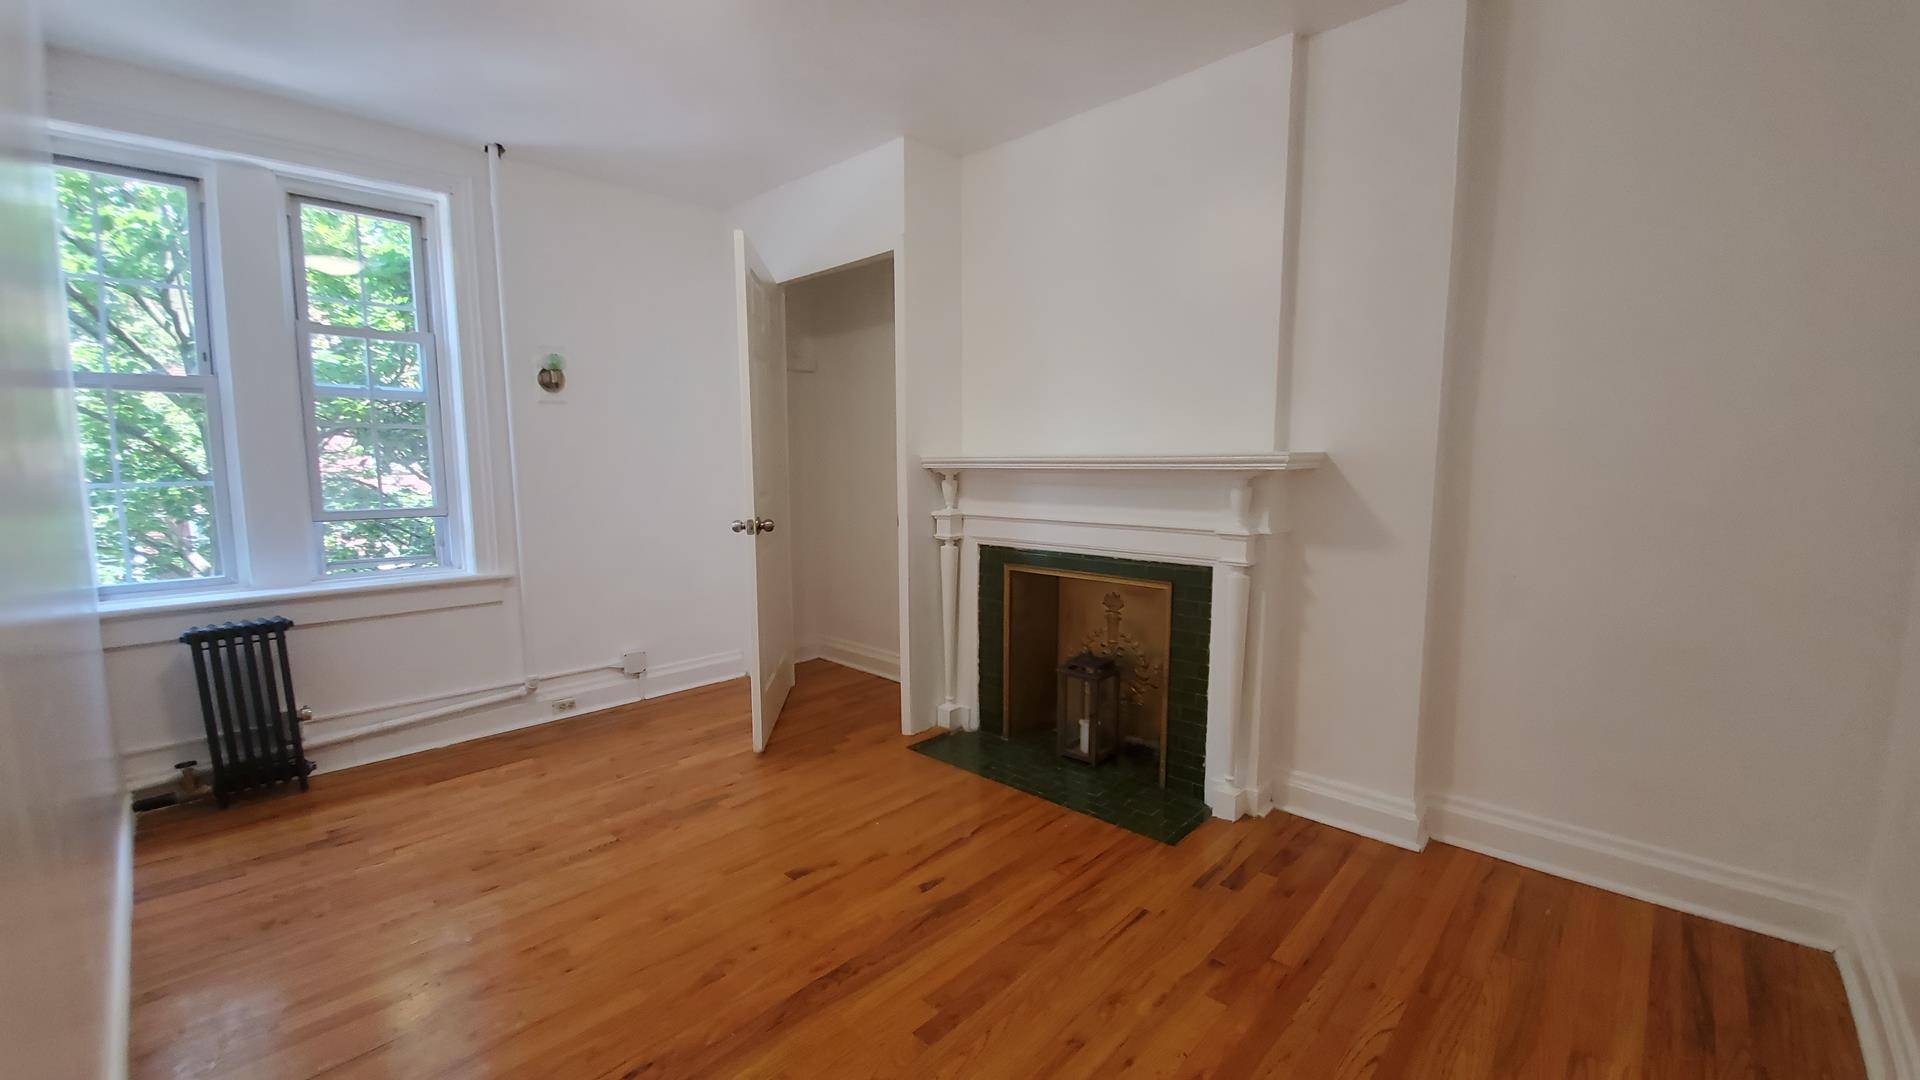 Available 7 15 This unit is a super charming yet massive, two bedroom apartment.